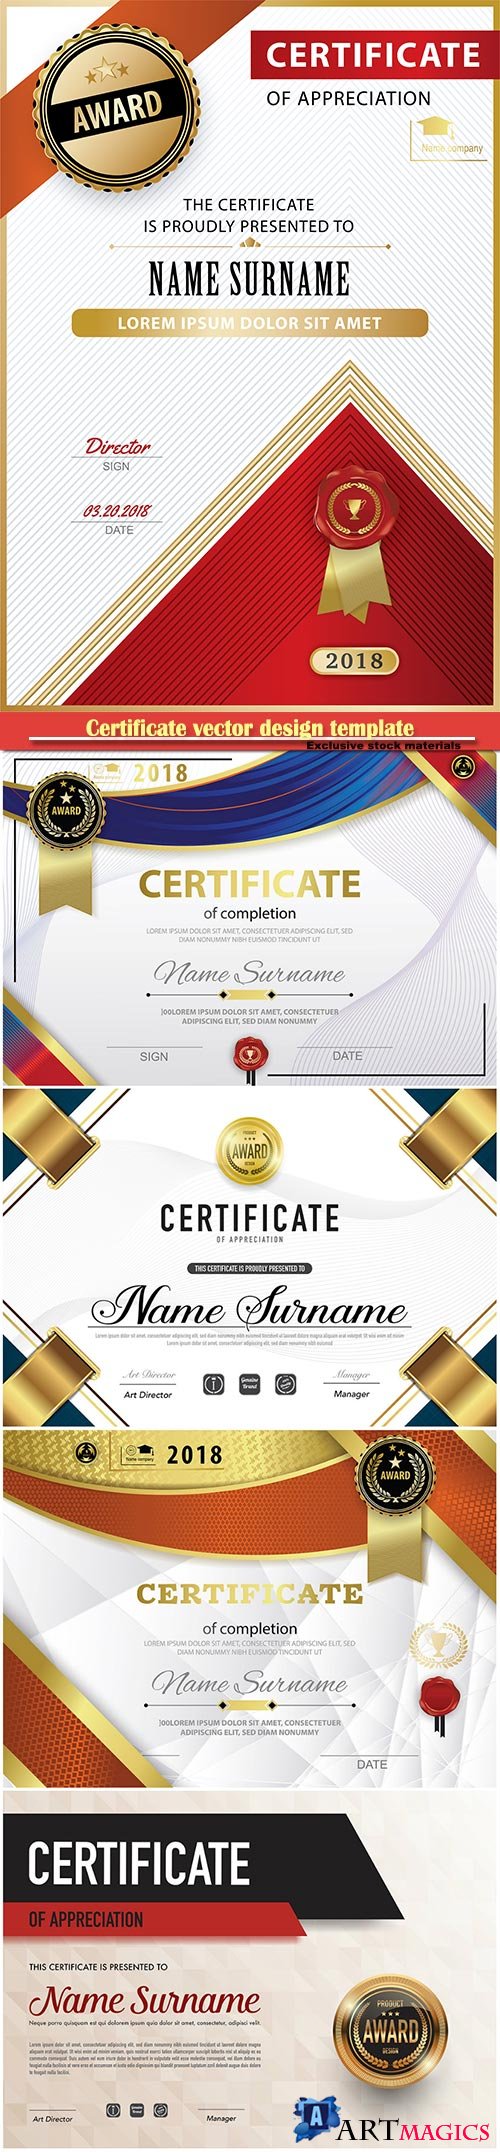 Certificate and vector diploma design template # 74